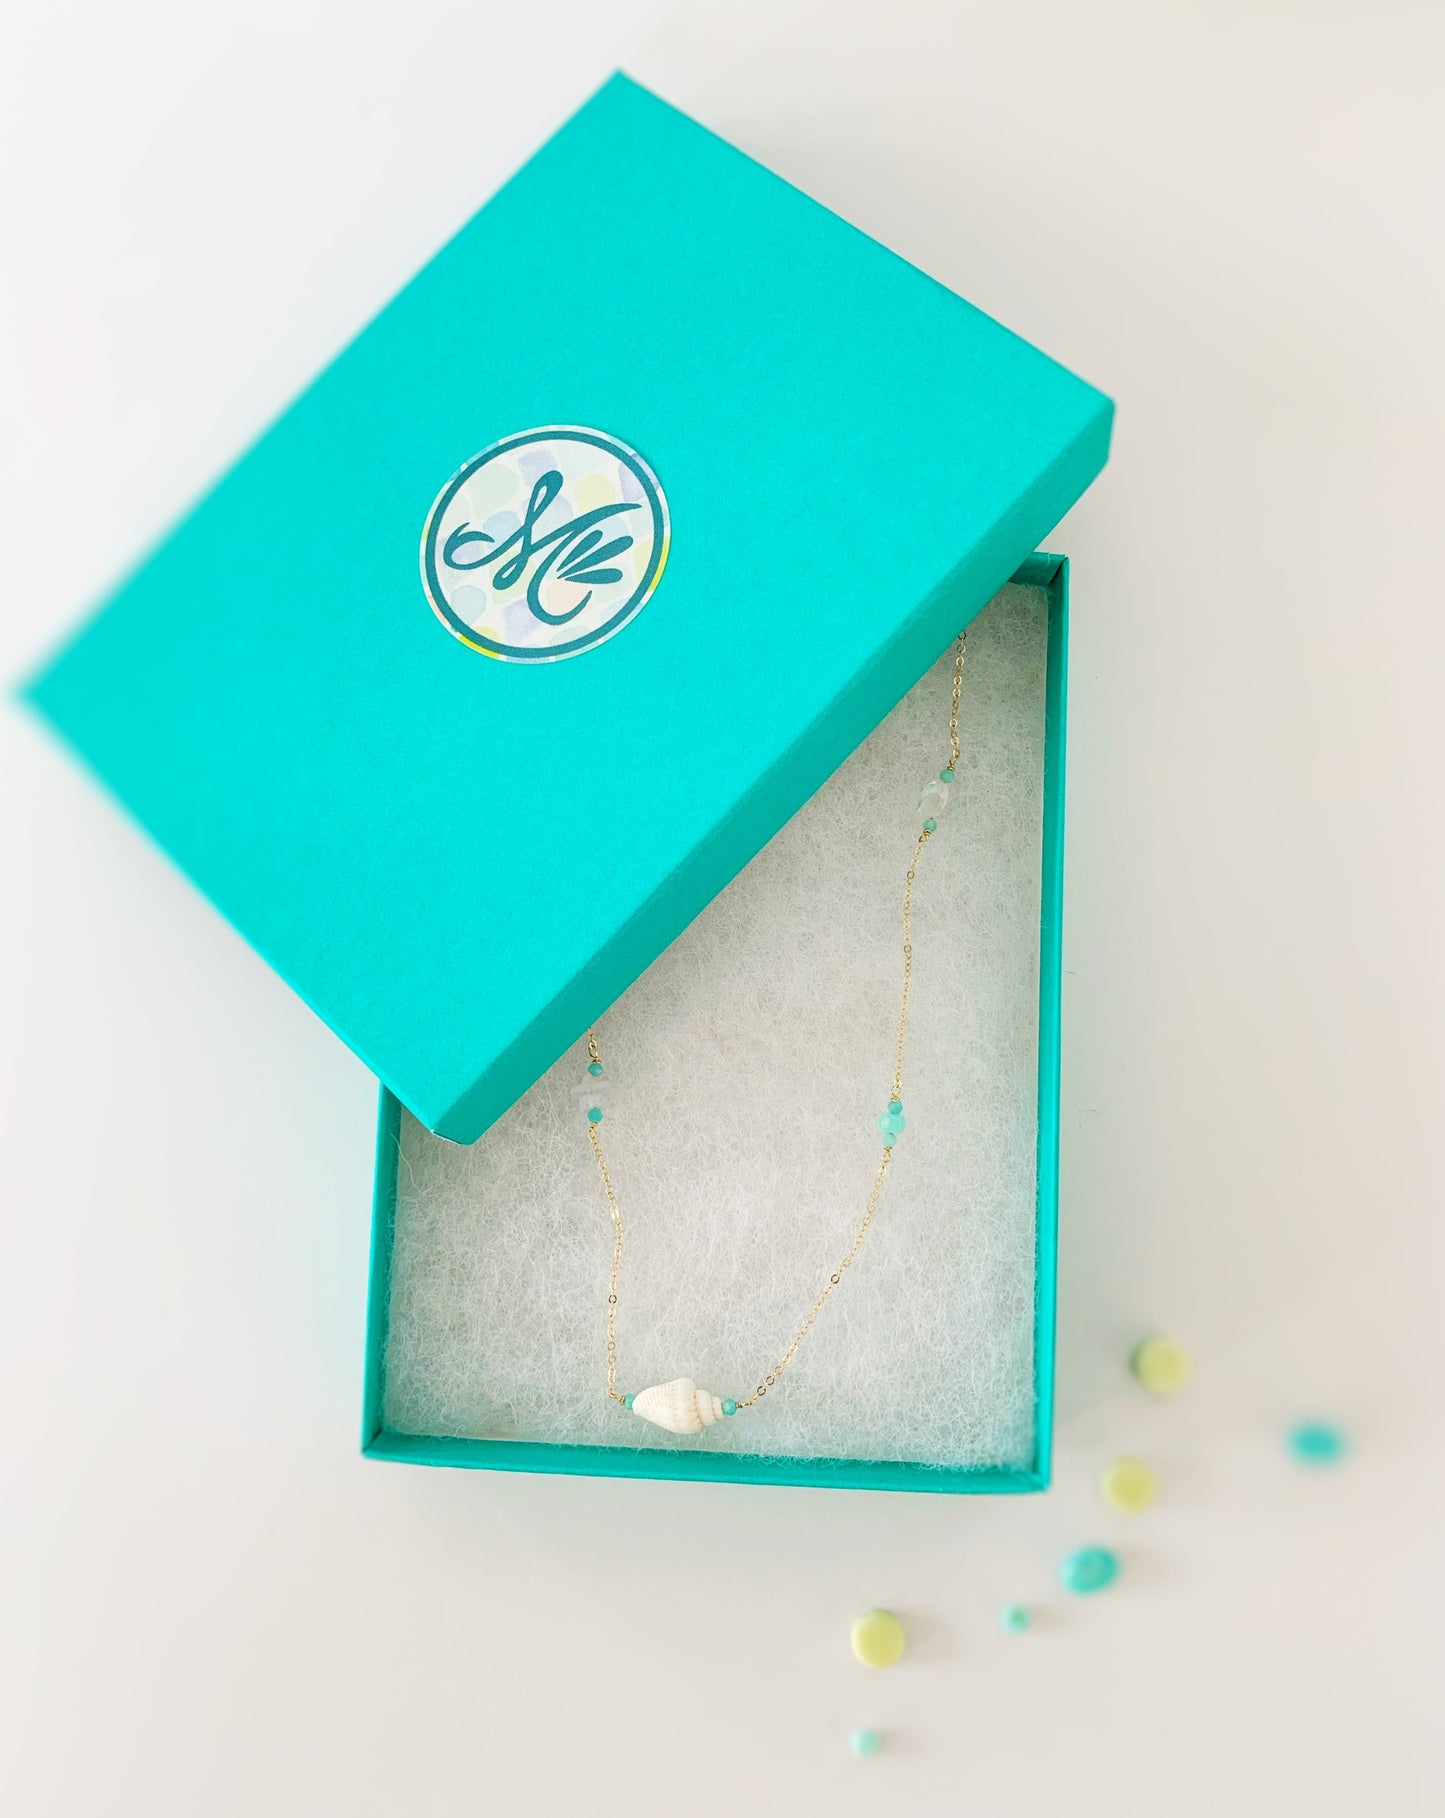 The Island hopper is from the shellebration collection, its pictured here in a cotton lined teal color gift box with a mermaids and madeleines logo sticker on it. the necklace is in the box and it's photographed on a white background